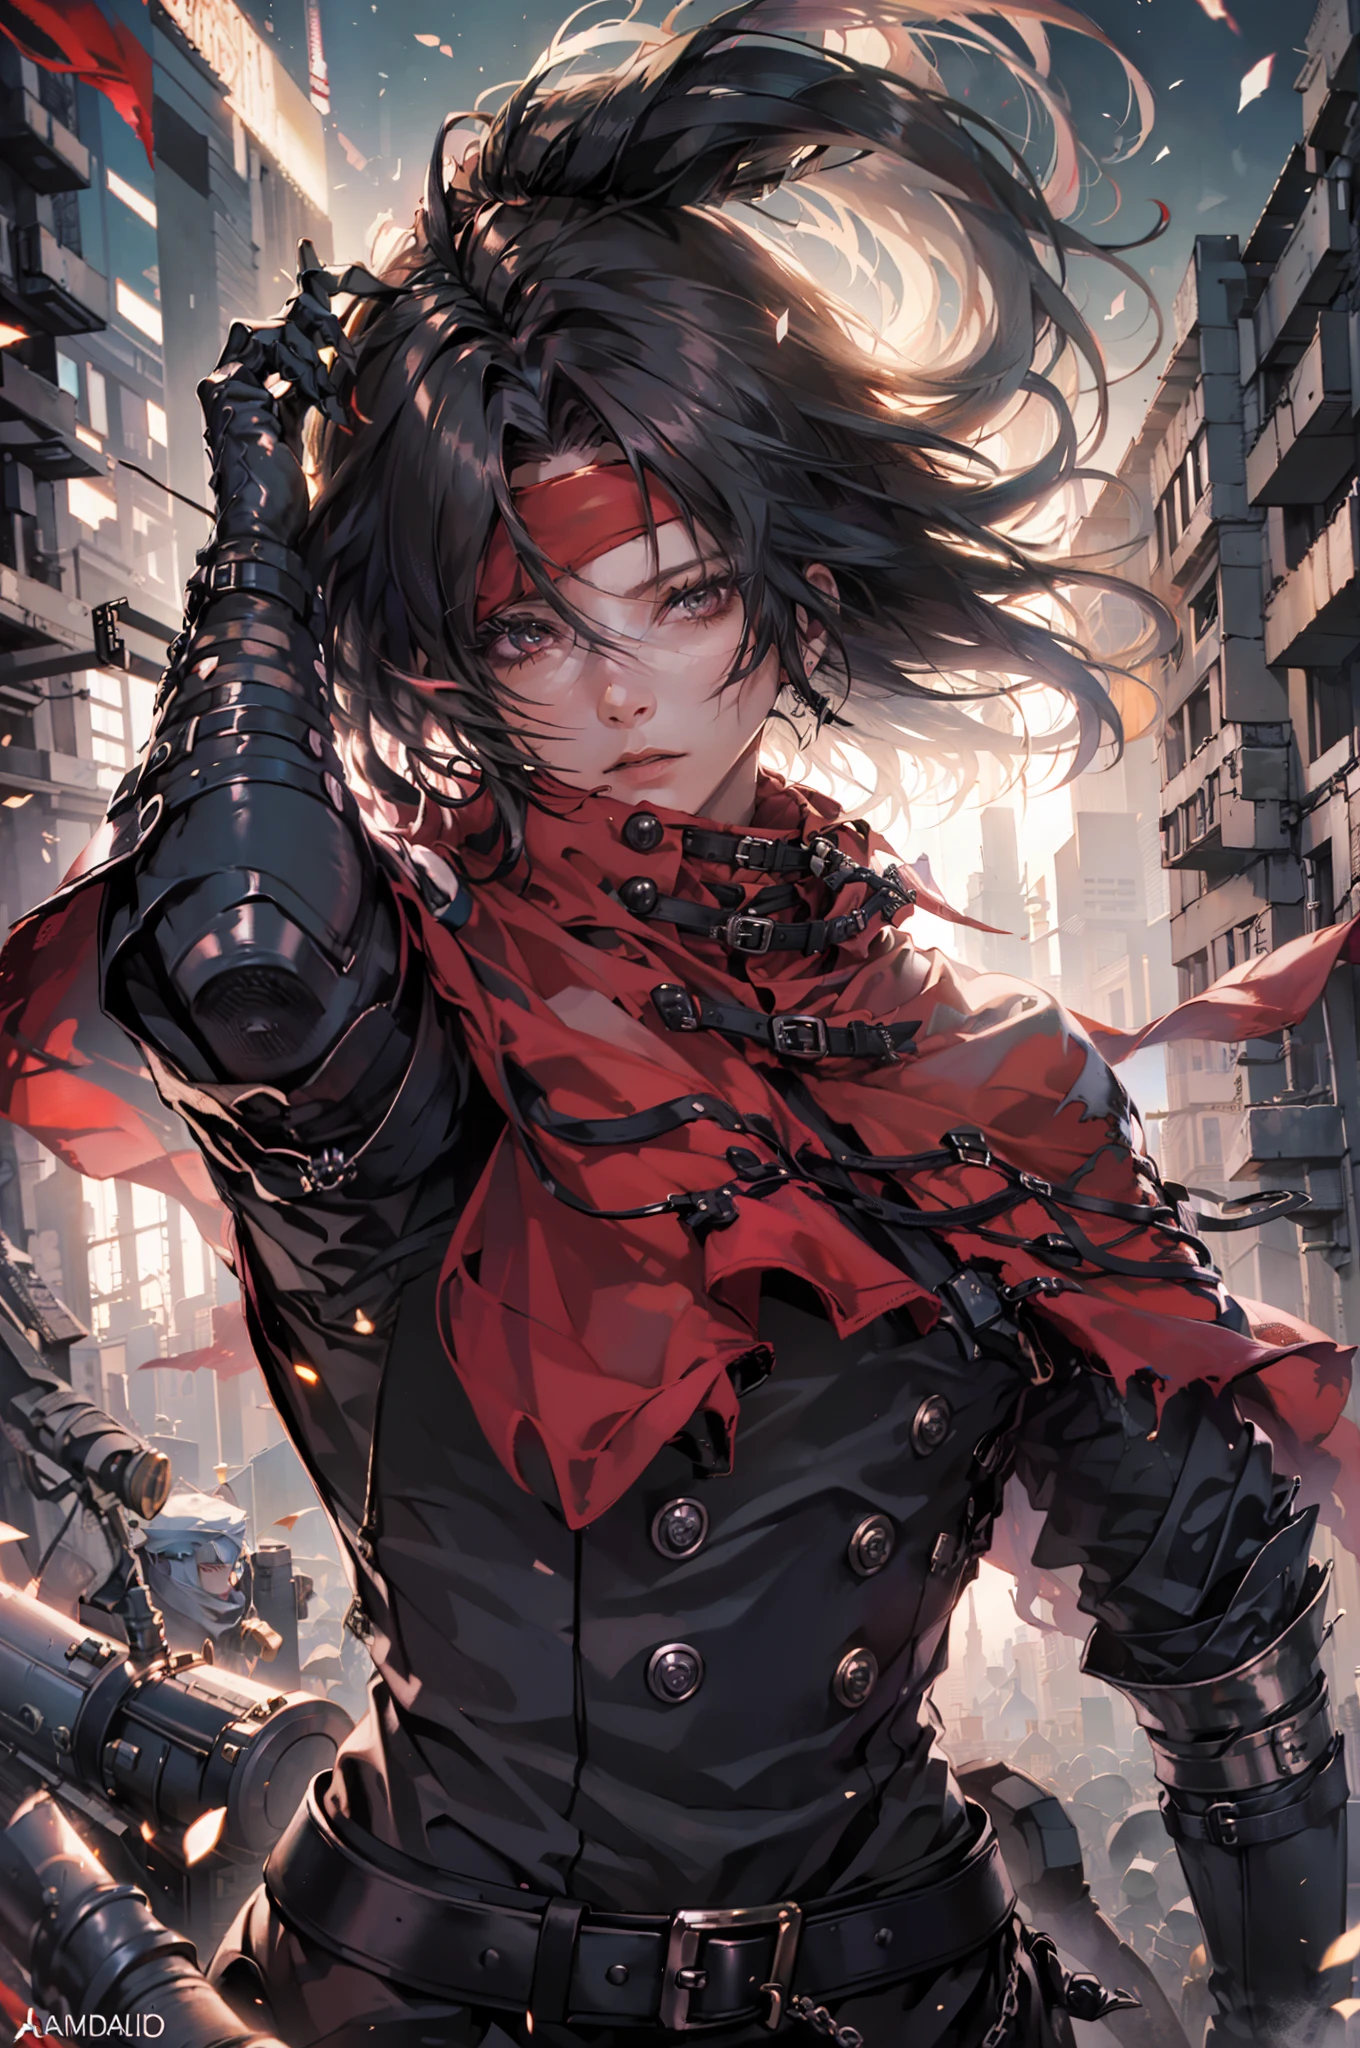 (absurdities, High Resolutions, ultra detailed, HDR), Masterpiece, The best quality, VincentValentine's Day, 1man, only, handsome,  long black hair, Red eyes, red cape, red headband, covered mouth, long neck, dark background, machine gun, surrounded by bullet, From above, dynamic  pose